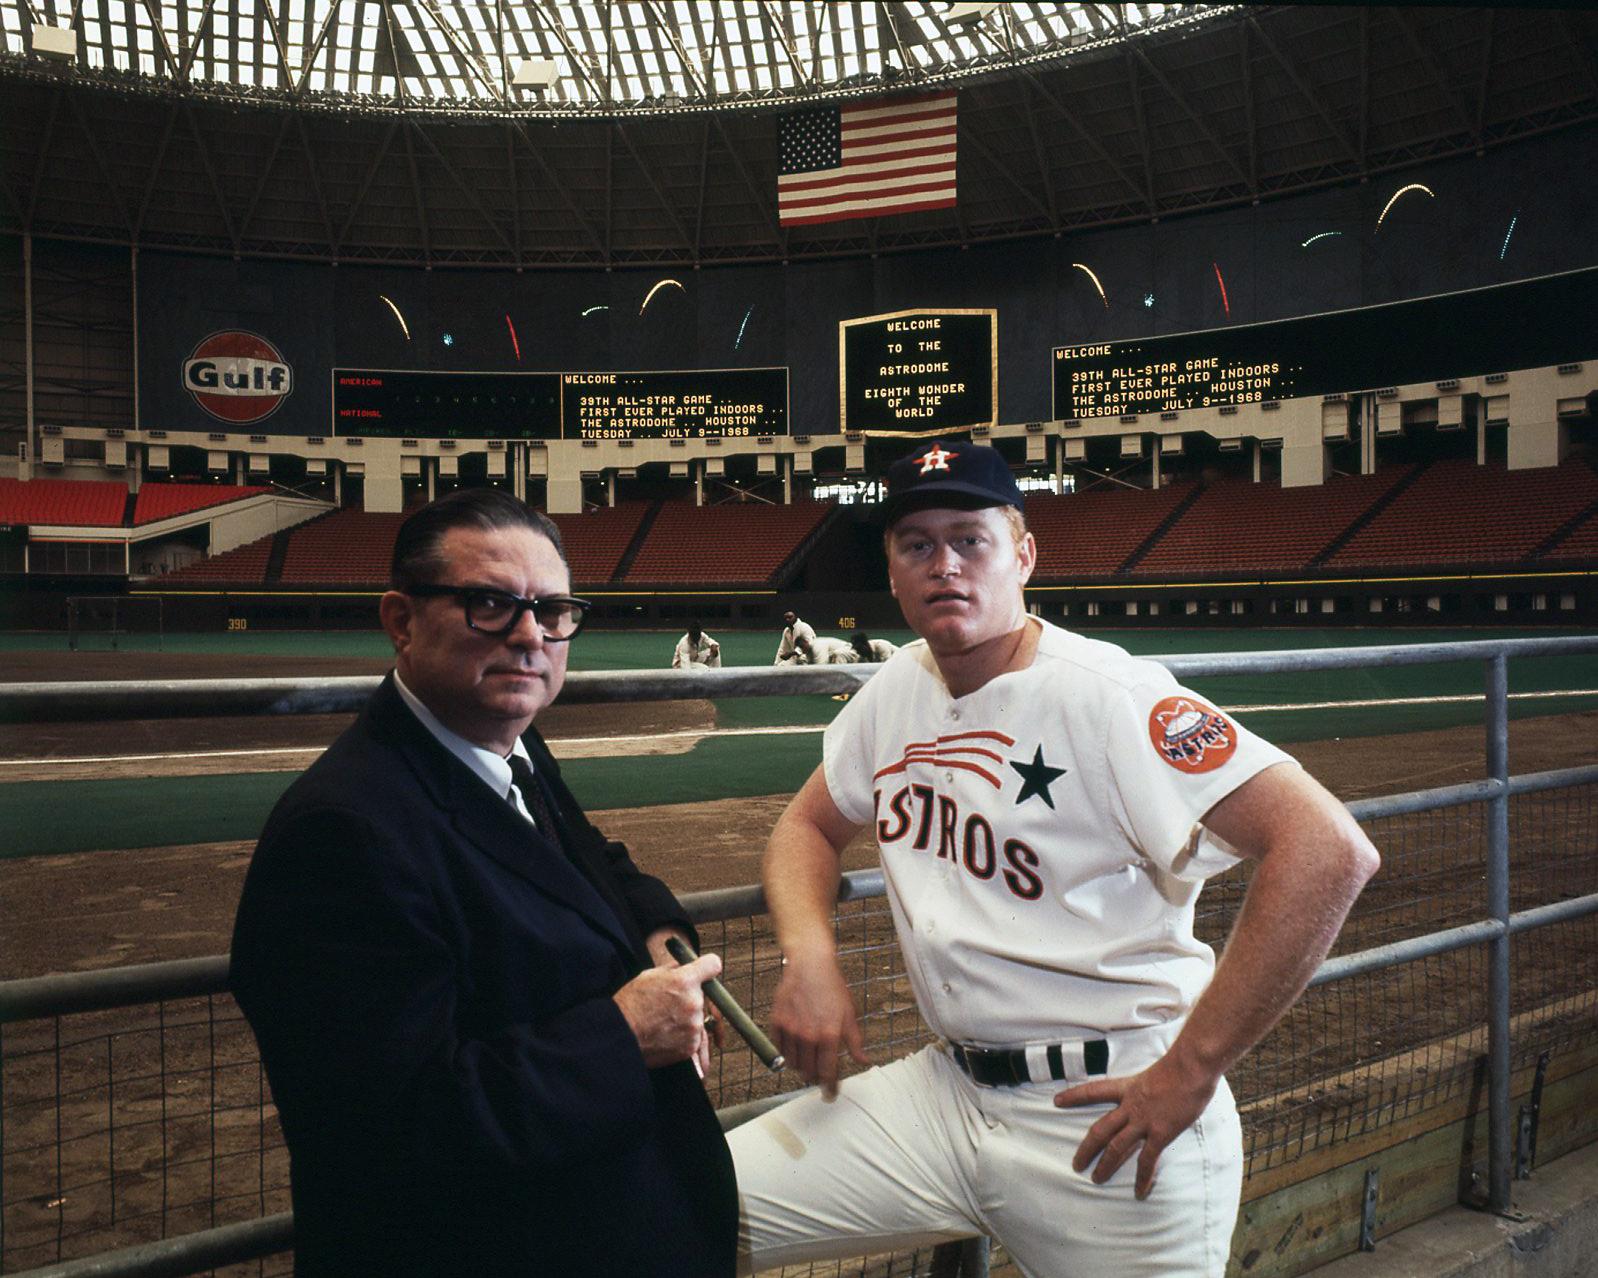 Rusty Staub, former Astro slugger who spent 23 years in the majors